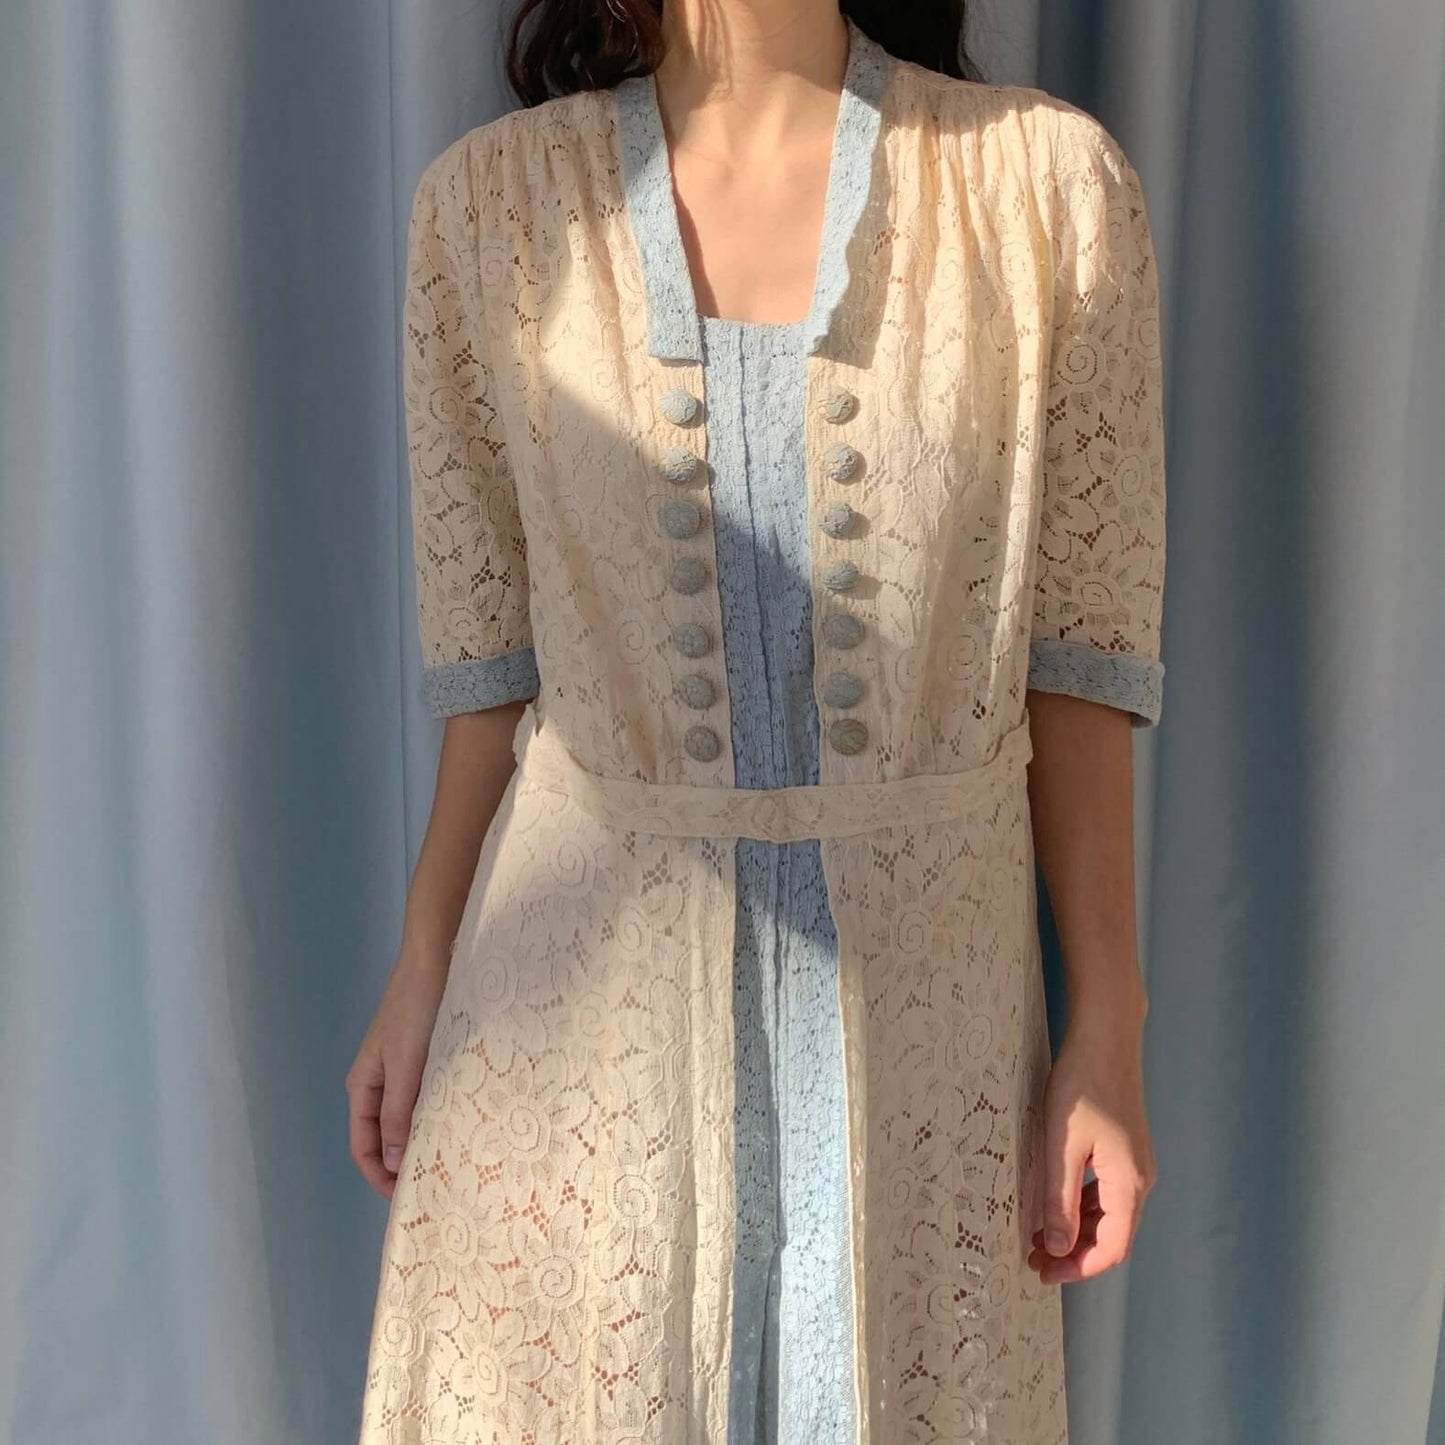 vintage 1920s drop waist dress in white and blue lace